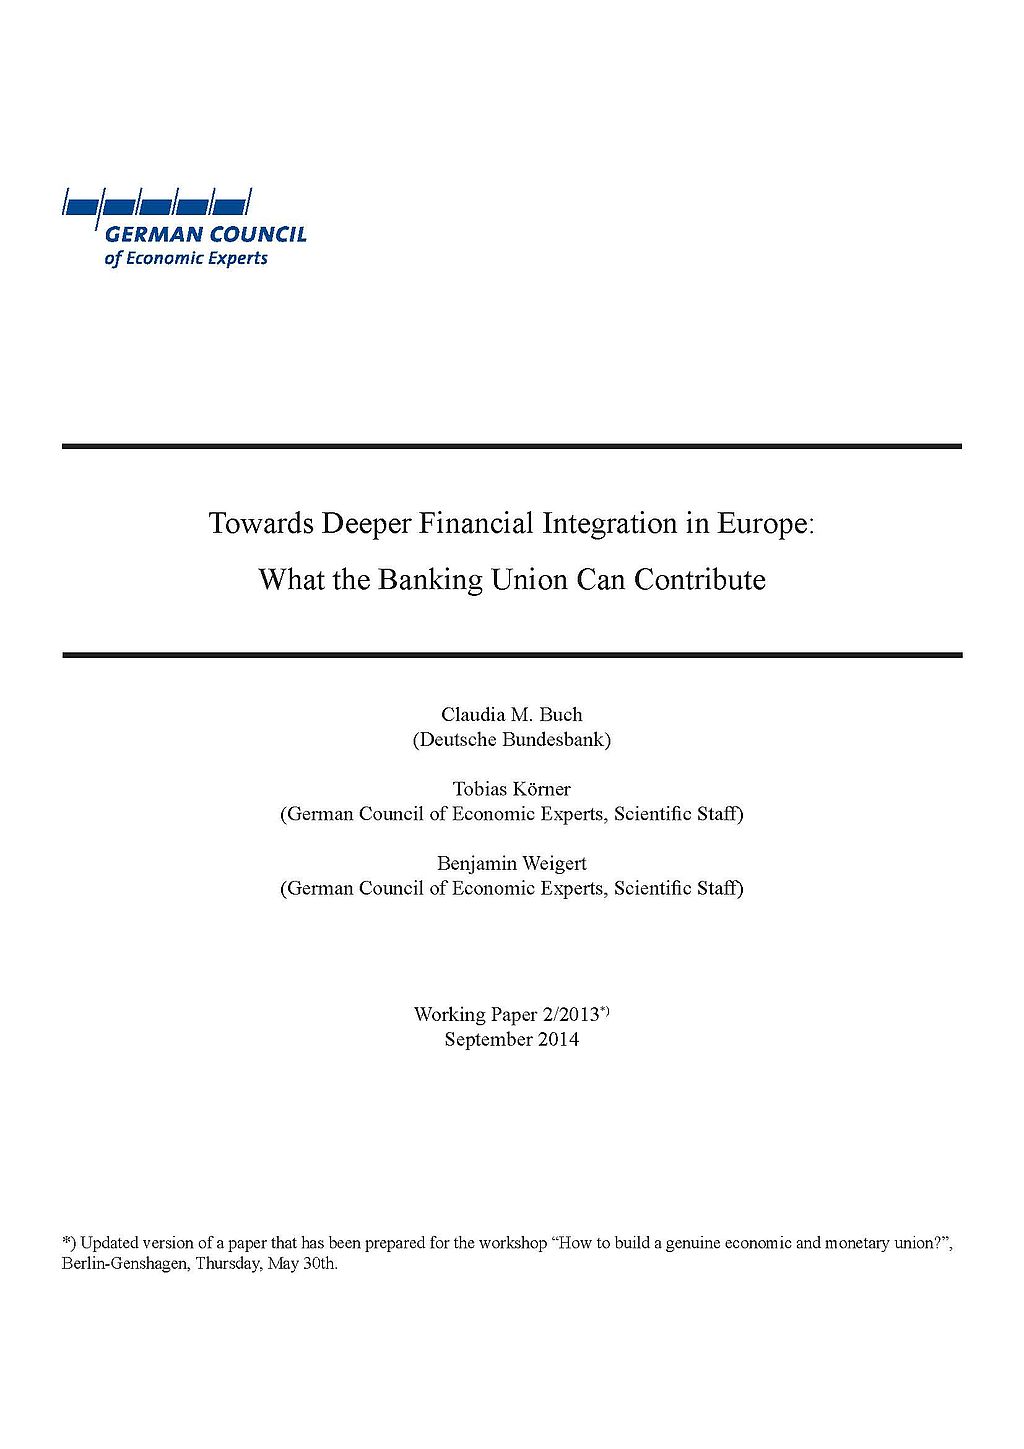 cover_German-Council-of-Economic-Experts-Working-Paper_2013-02.jpg